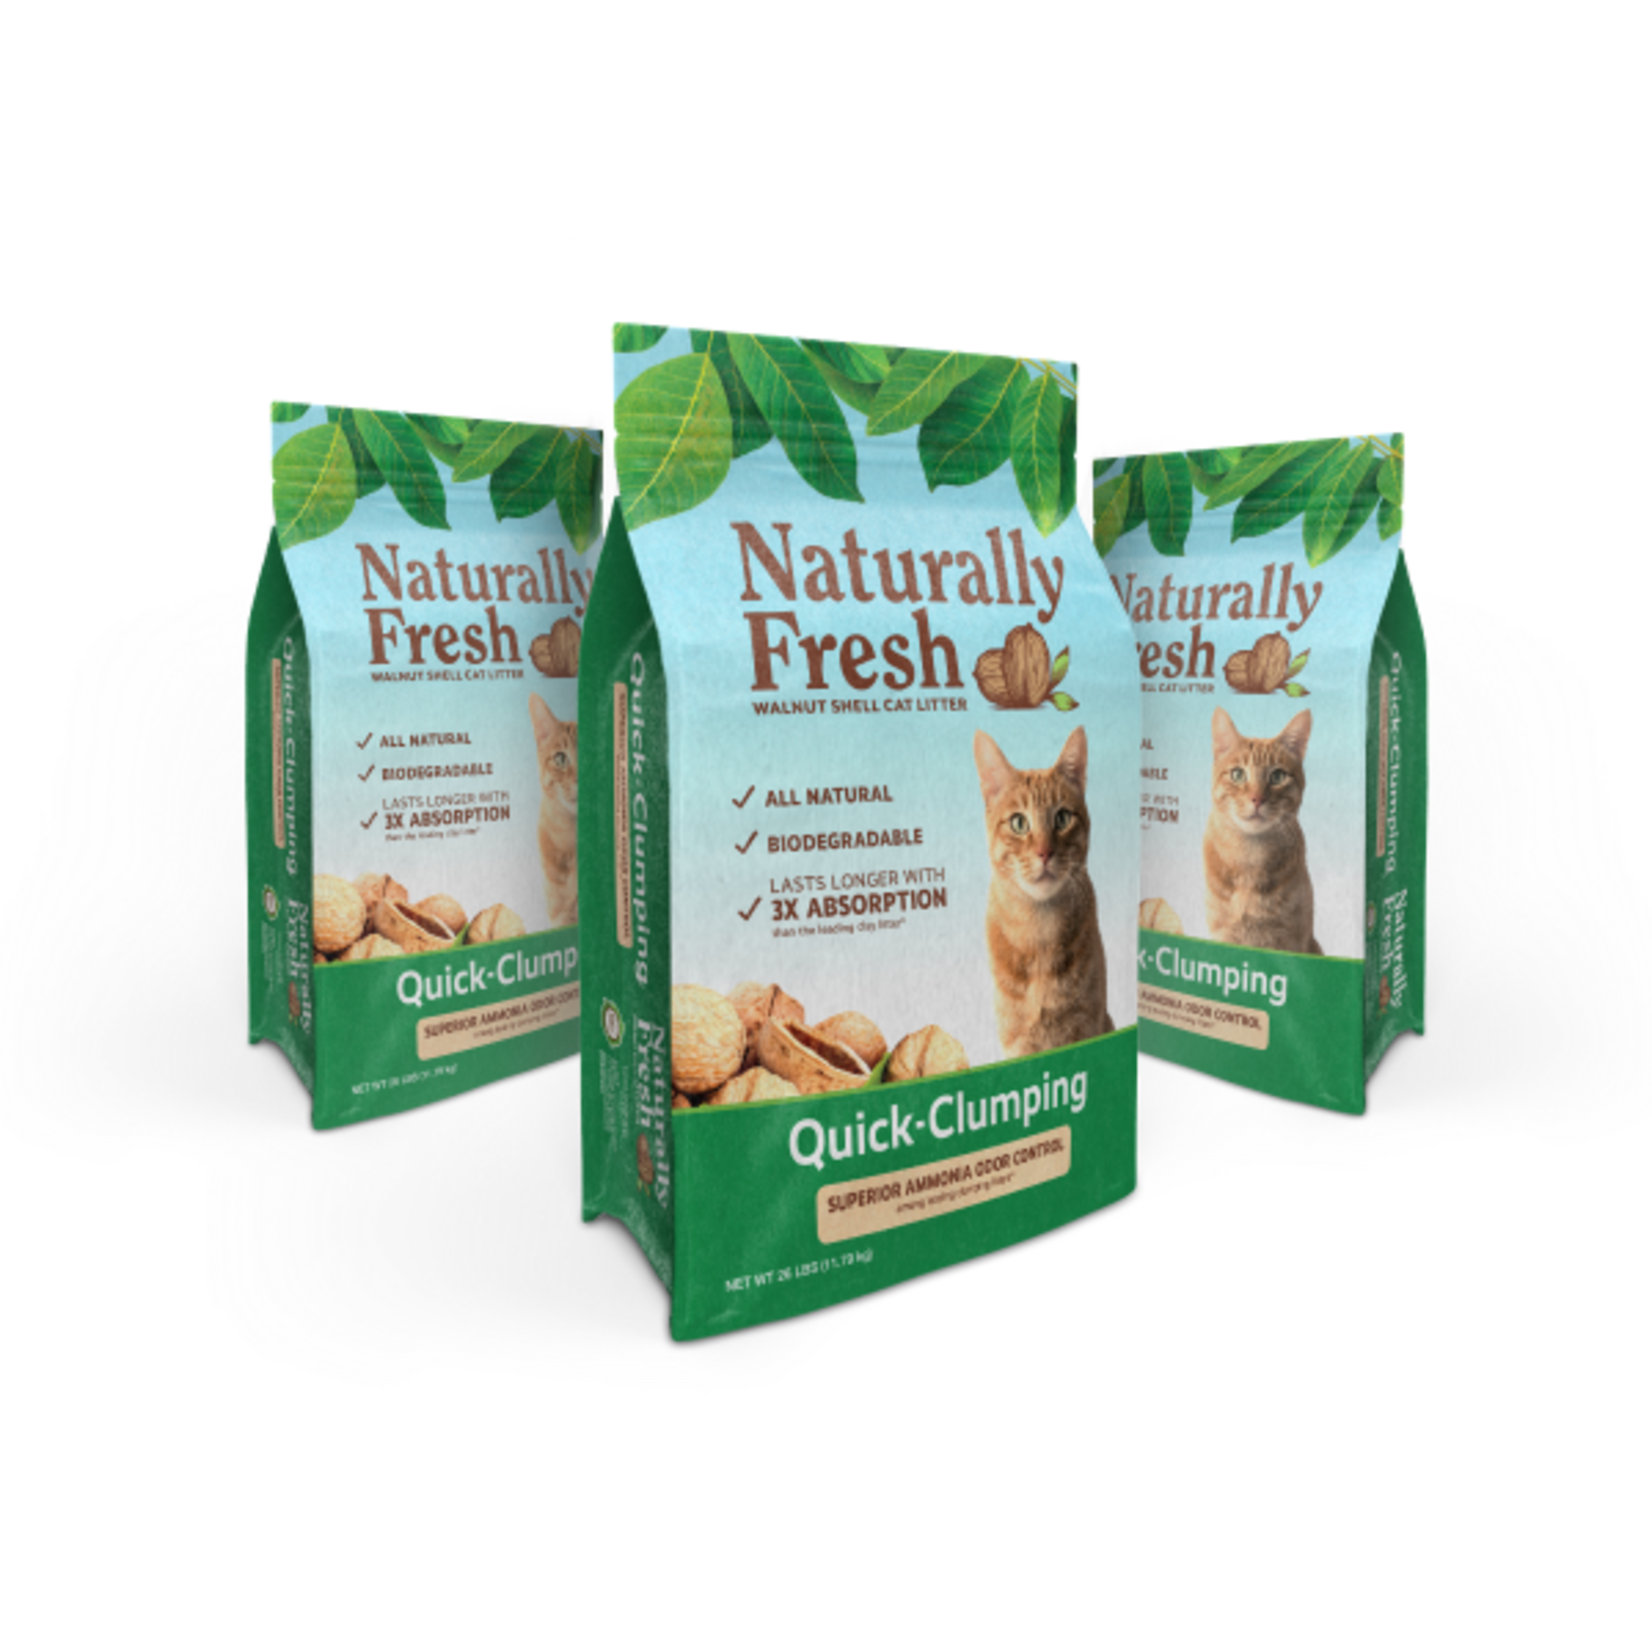 Eco-Shell Naturally Fresh Walnut Based Unscented Quick Clumping Litter